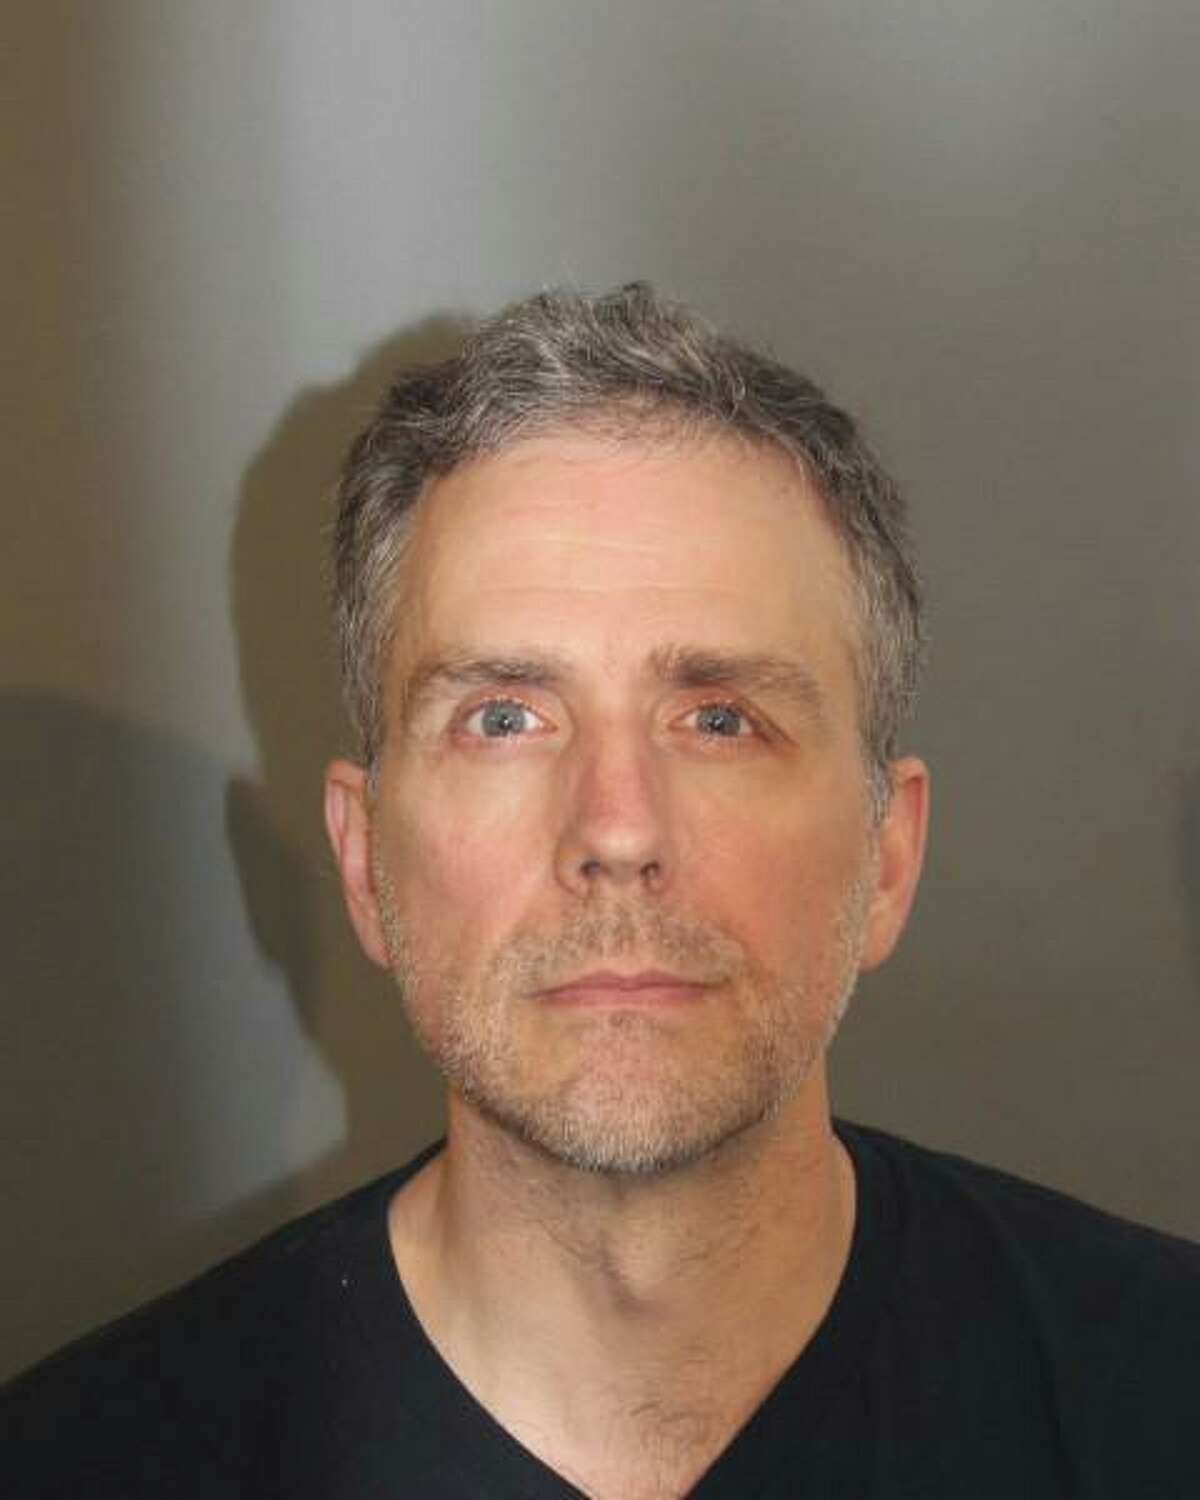 Kenneth Gardner, 51, was arrested by Danbury police on May 31, 2022 on sexual assault and other charges. He resigned as a teacher at Broadview Middle School in February, about five months after an investigation into he and his wife began.